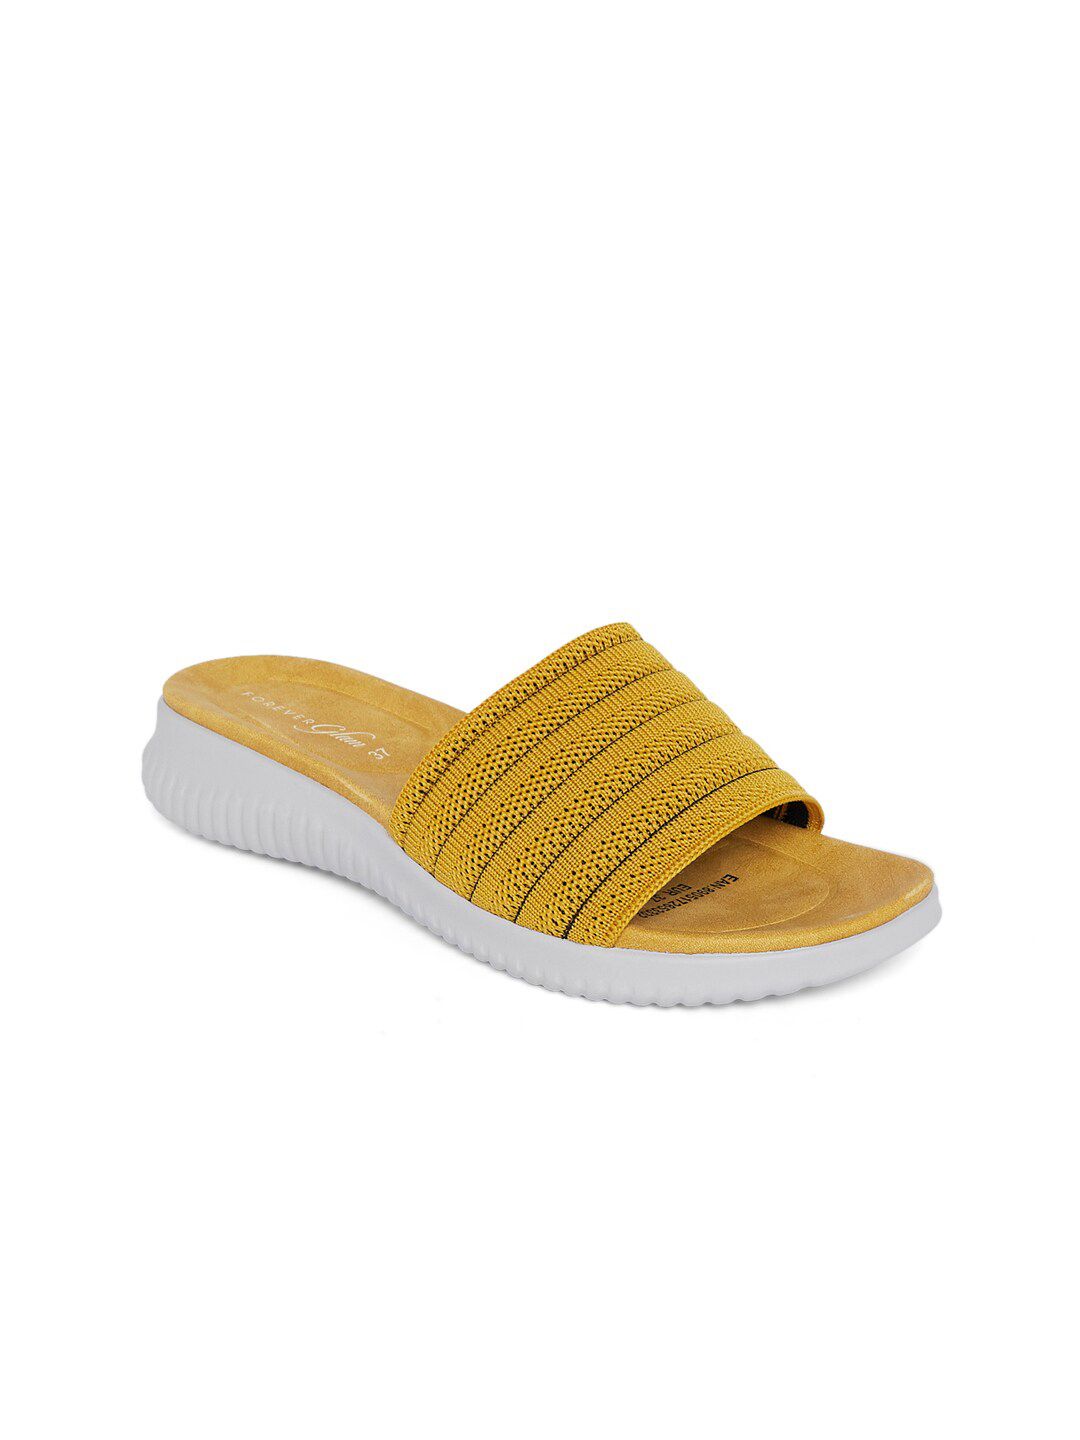 Forever Glam by Pantaloons Woman Yellow Open Toe Flats Price in India